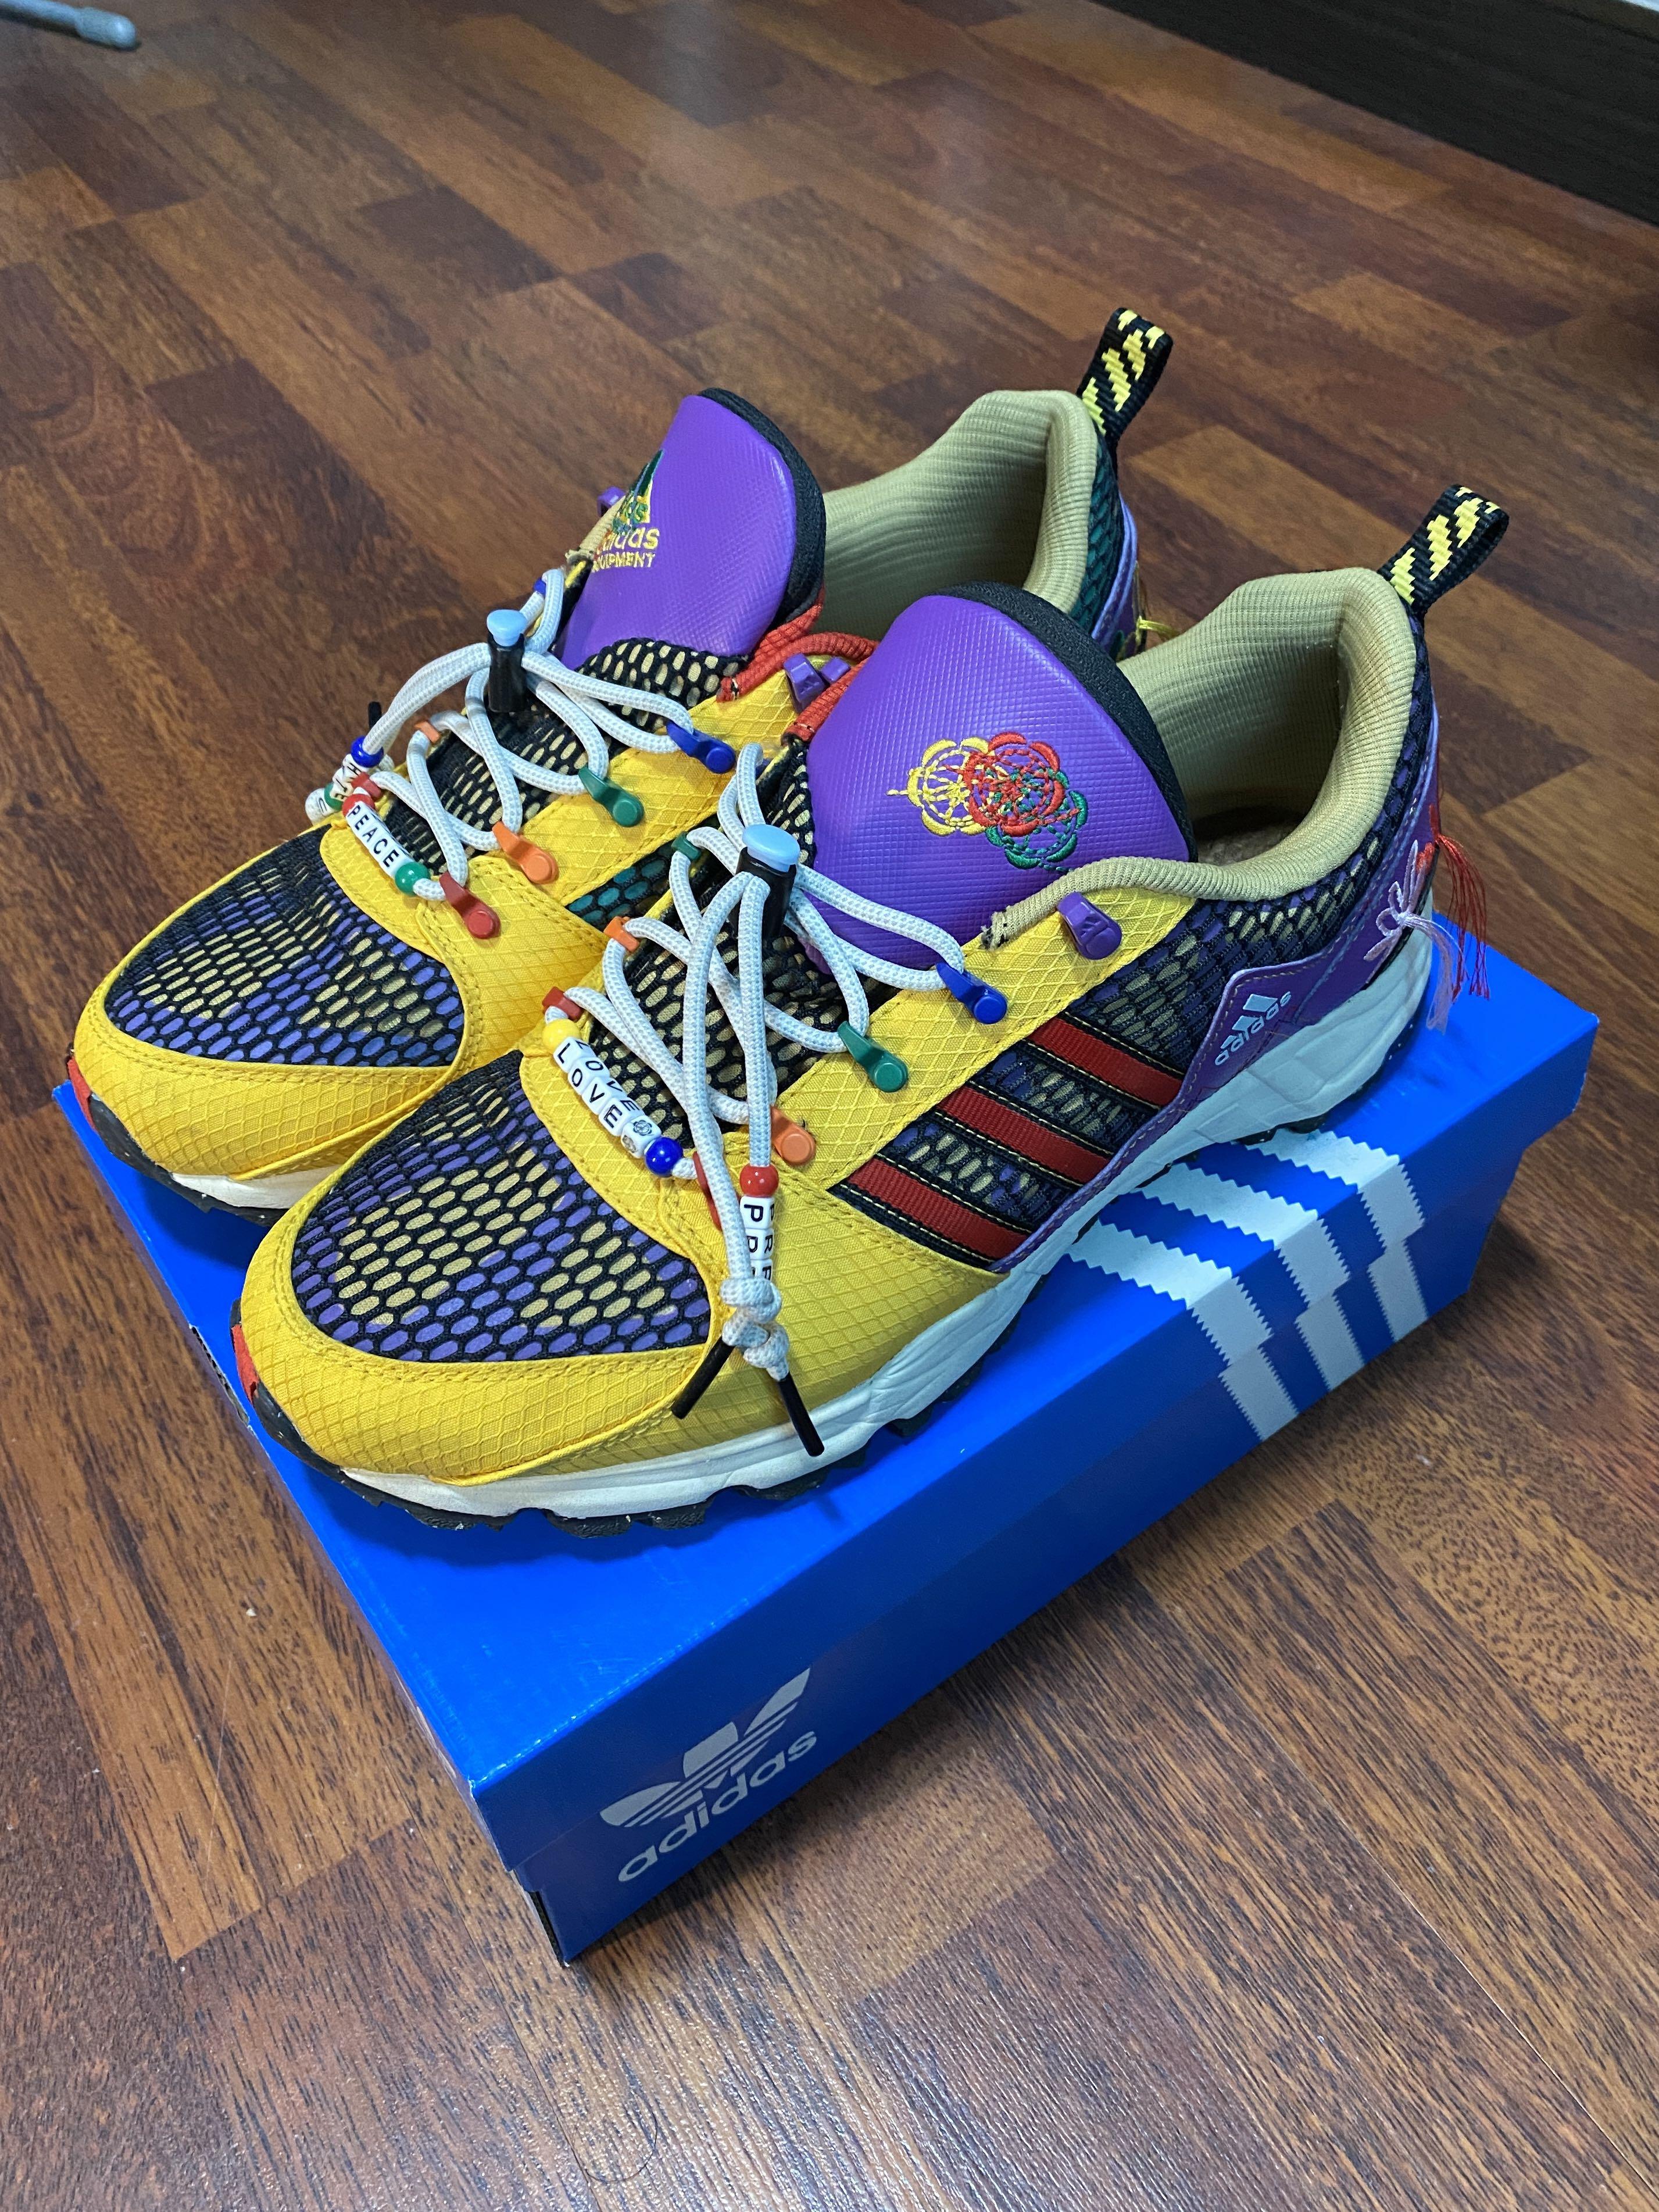 Adidas x Sean Wotherspoon EQT Support 93